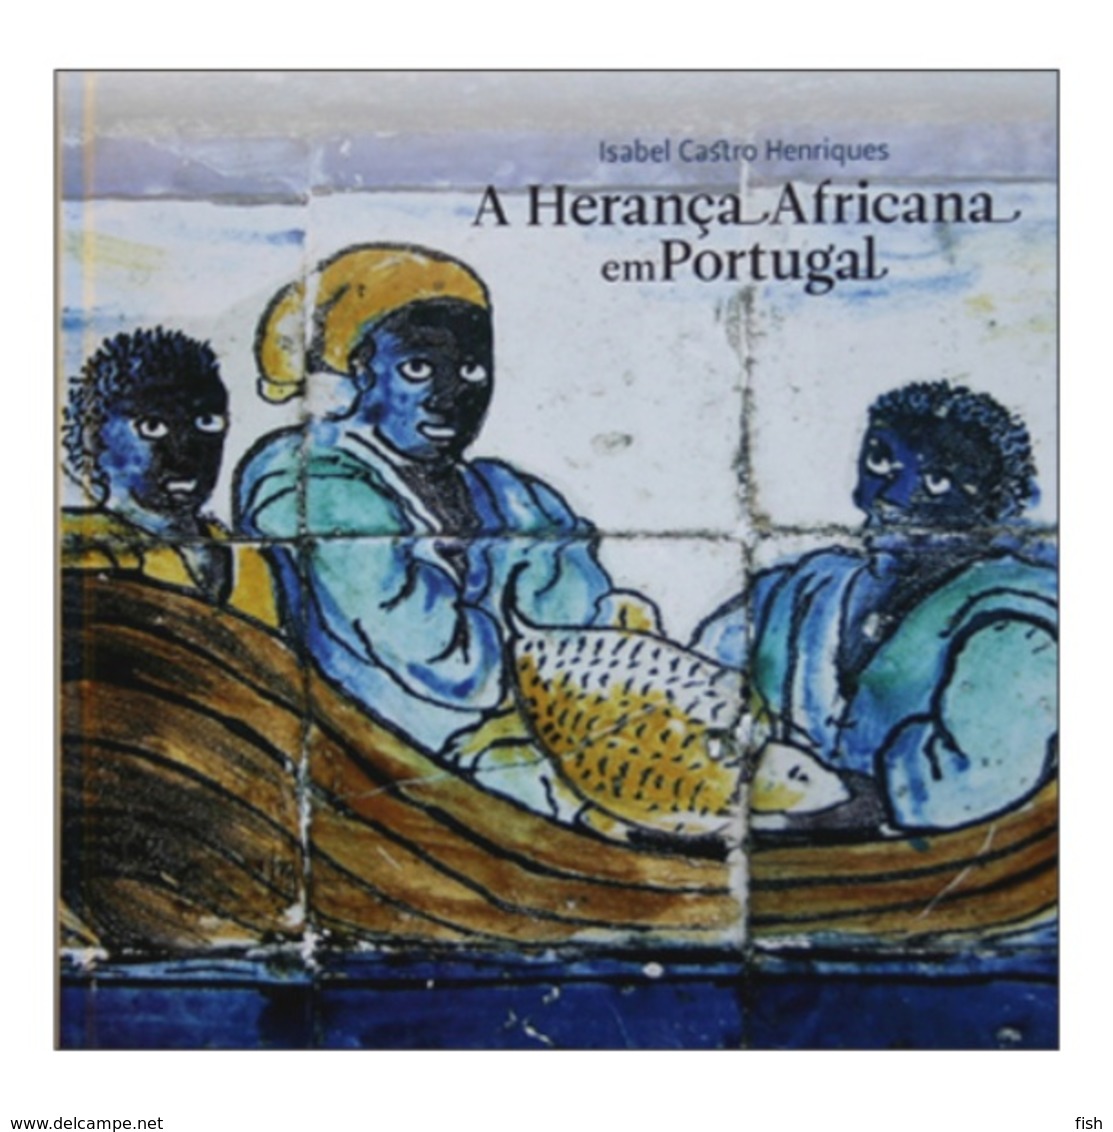 Portugal ** & CTT, Thematic Book With Stamps, African Heritage In Portugal 2009 (20190) - Book Of The Year